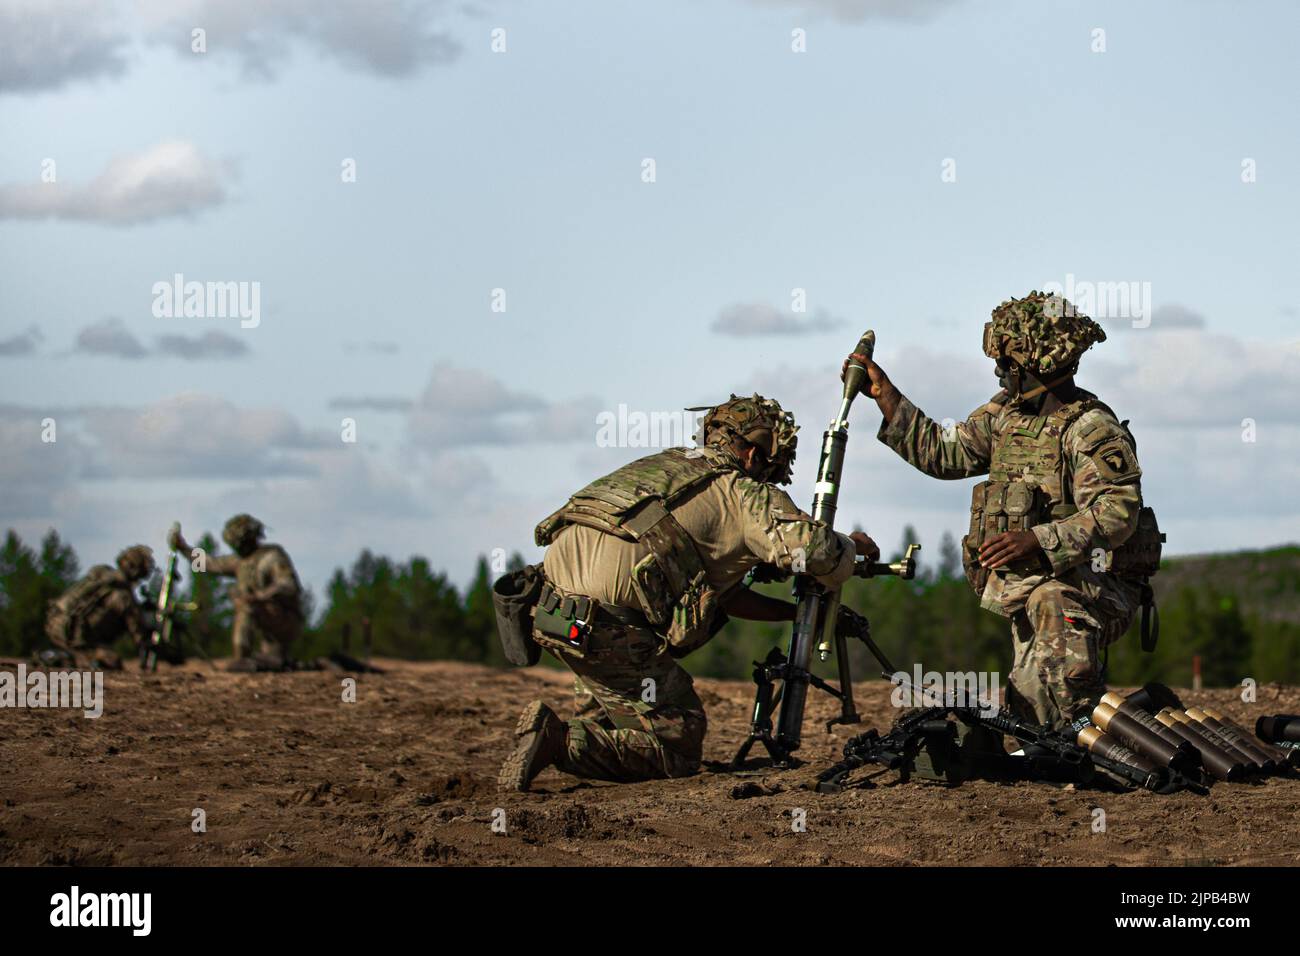 U.S. Soldiers assigned to Viper Company, 1st Battalion, 26th Infantry Regiment, 2nd Brigade Combat Team, 101st Airborne Division (Air Assault), fire an M224 60 mm mortar system as part of a fire mission in support of the company’s maneuver during a multinational live-fire exercise held at Rovaniemi Training Area, Finland, Aug. 11, 2022. The LFX was part of the Finnish Summer Exercise, where U.S. and Finnish troops had the opportunity to train together to amplify and strengthen the partnership and interoperability between the two nations. (U.S. Army National Guard photo by Sgt. Agustín Montañez Stock Photo